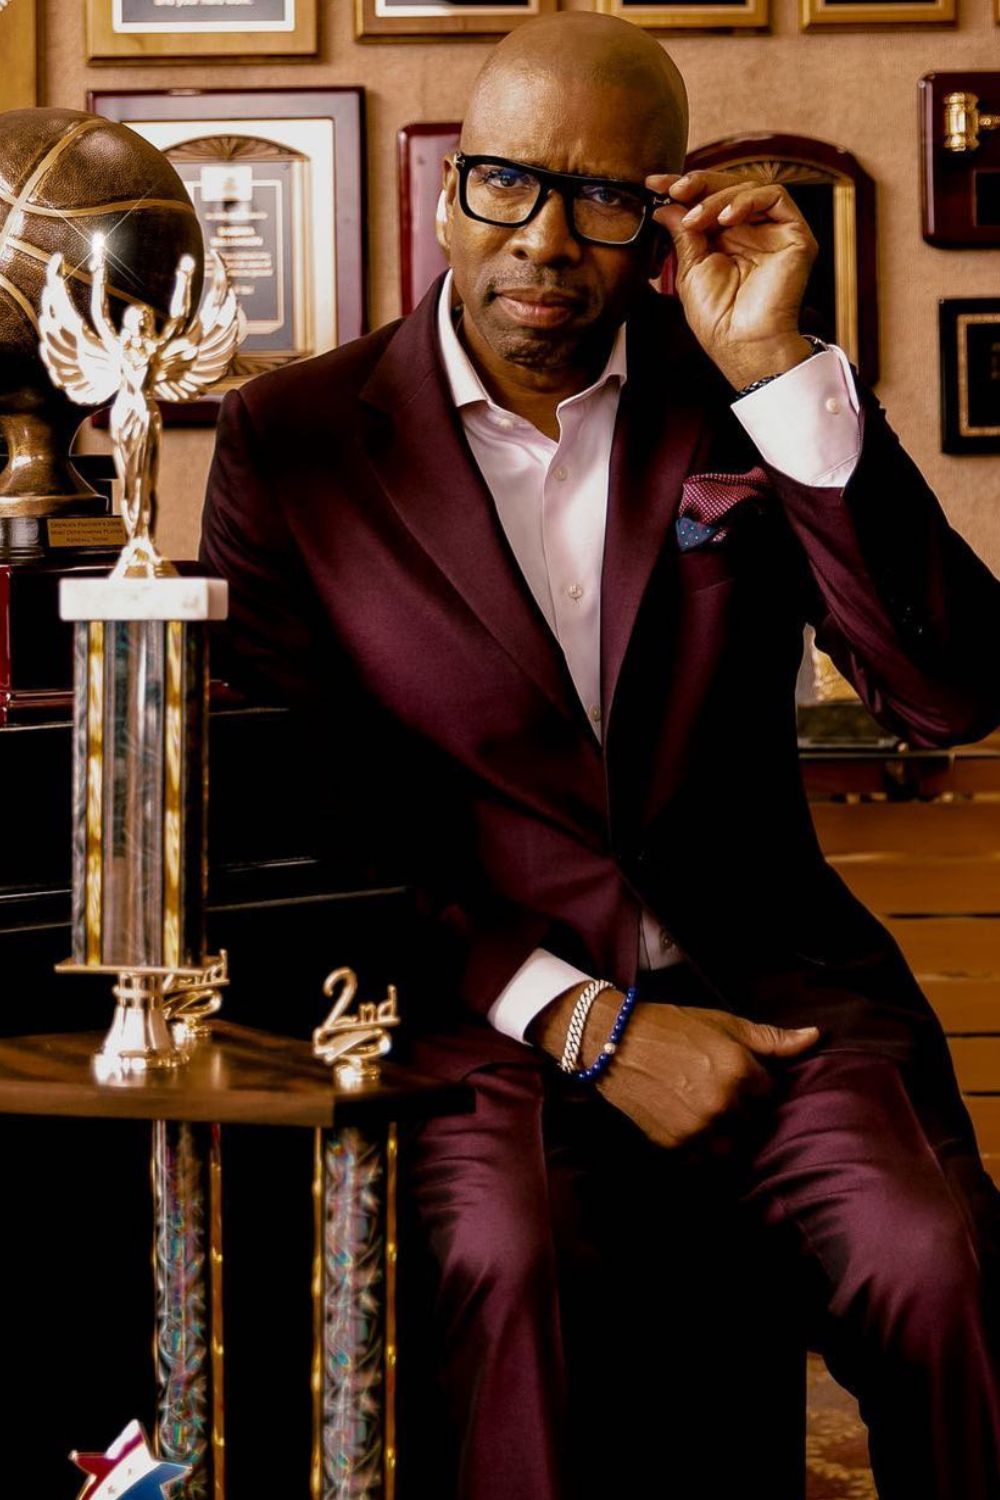 Kenny Smith, An American Sports Commentator And Former NBA Player